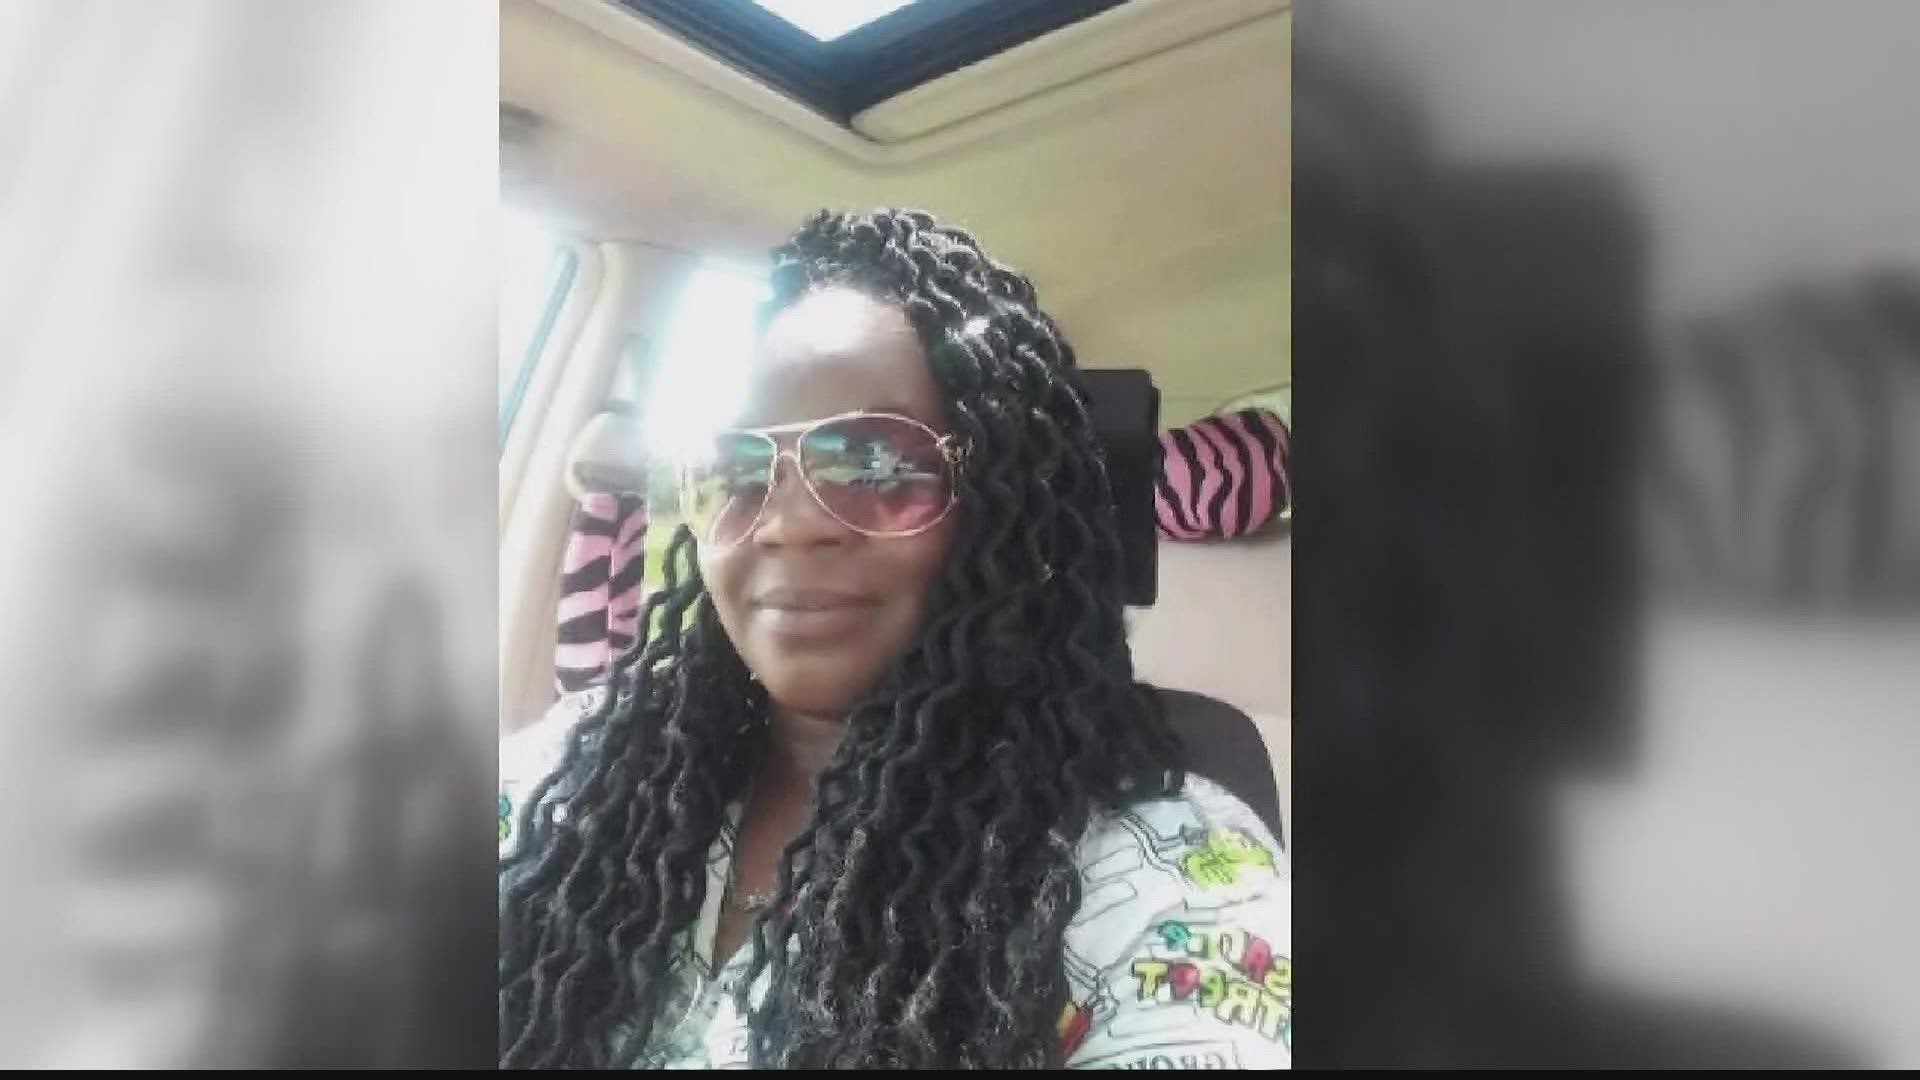 Stephanie Walker died Friday, nearly a week after her 13-year-old granddaughter drowned in West Point Lake, authorities say.